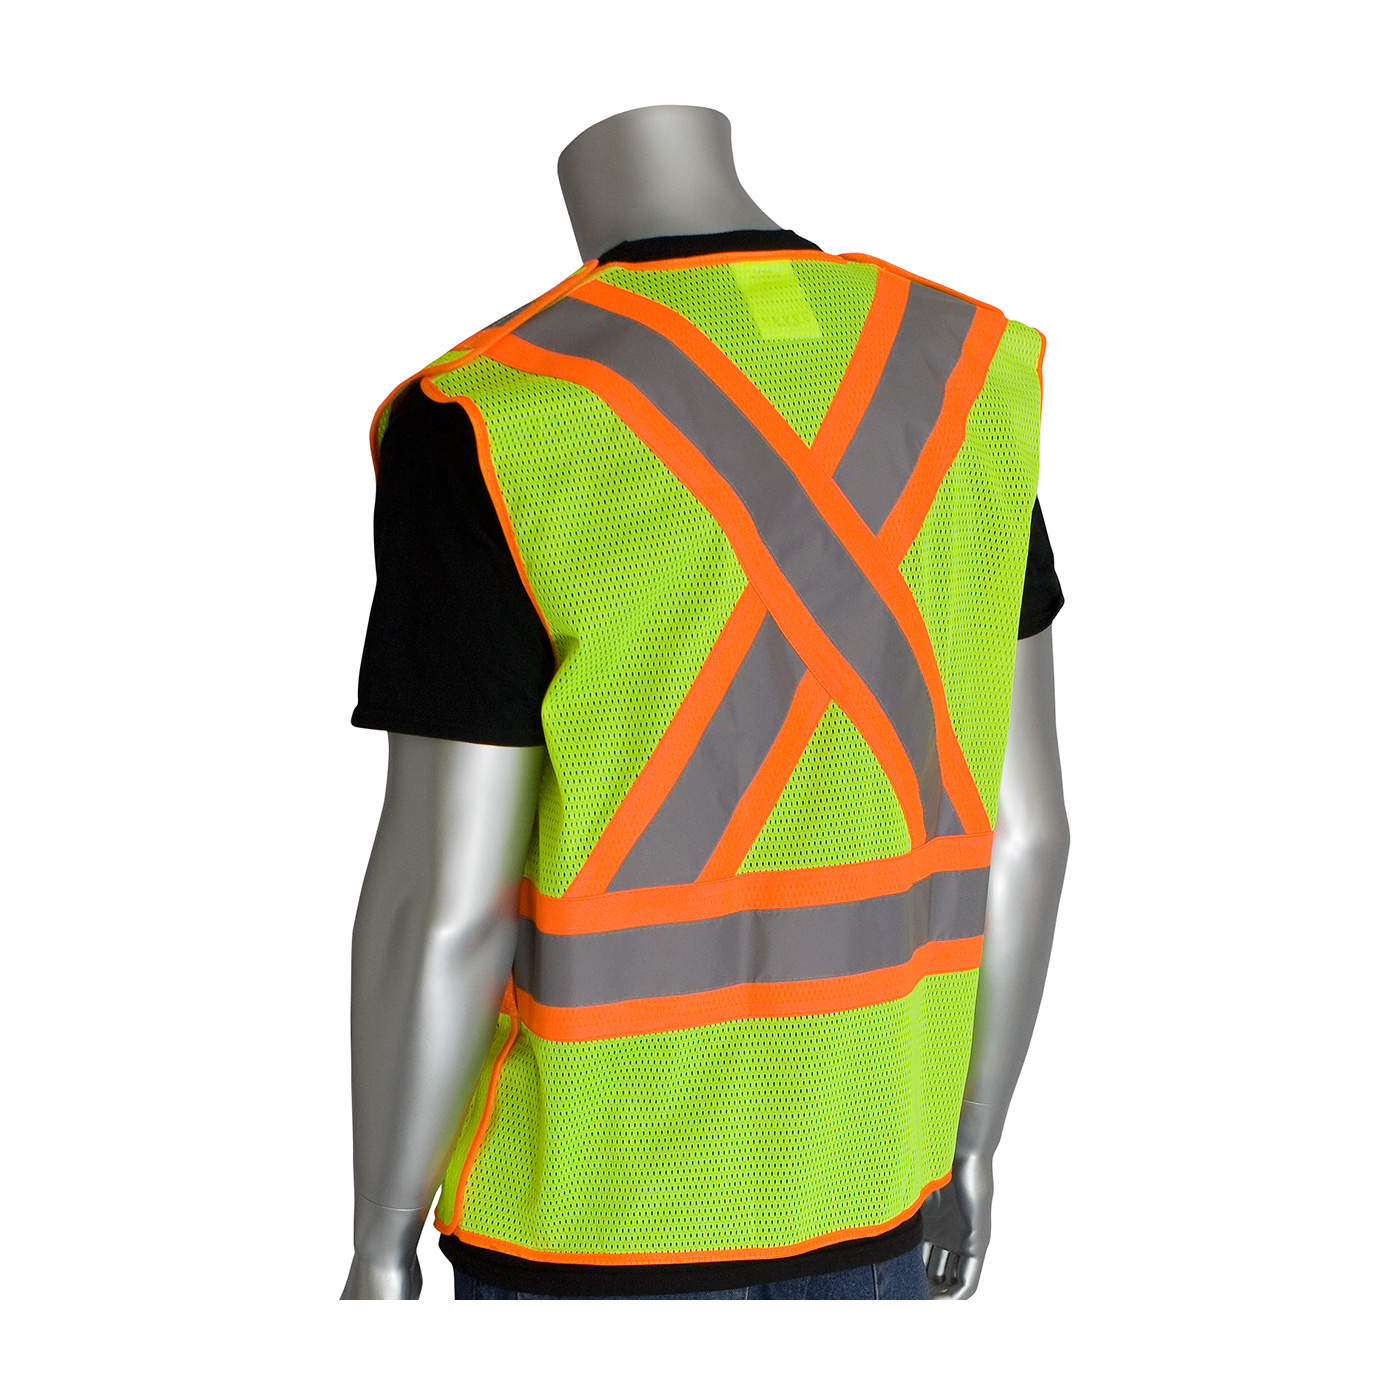 PIP® ANSI Type R Class 2 and CAN/CSA Z96 Two-Tone X-Back Breakaway Mesh Vest #302-0211LY